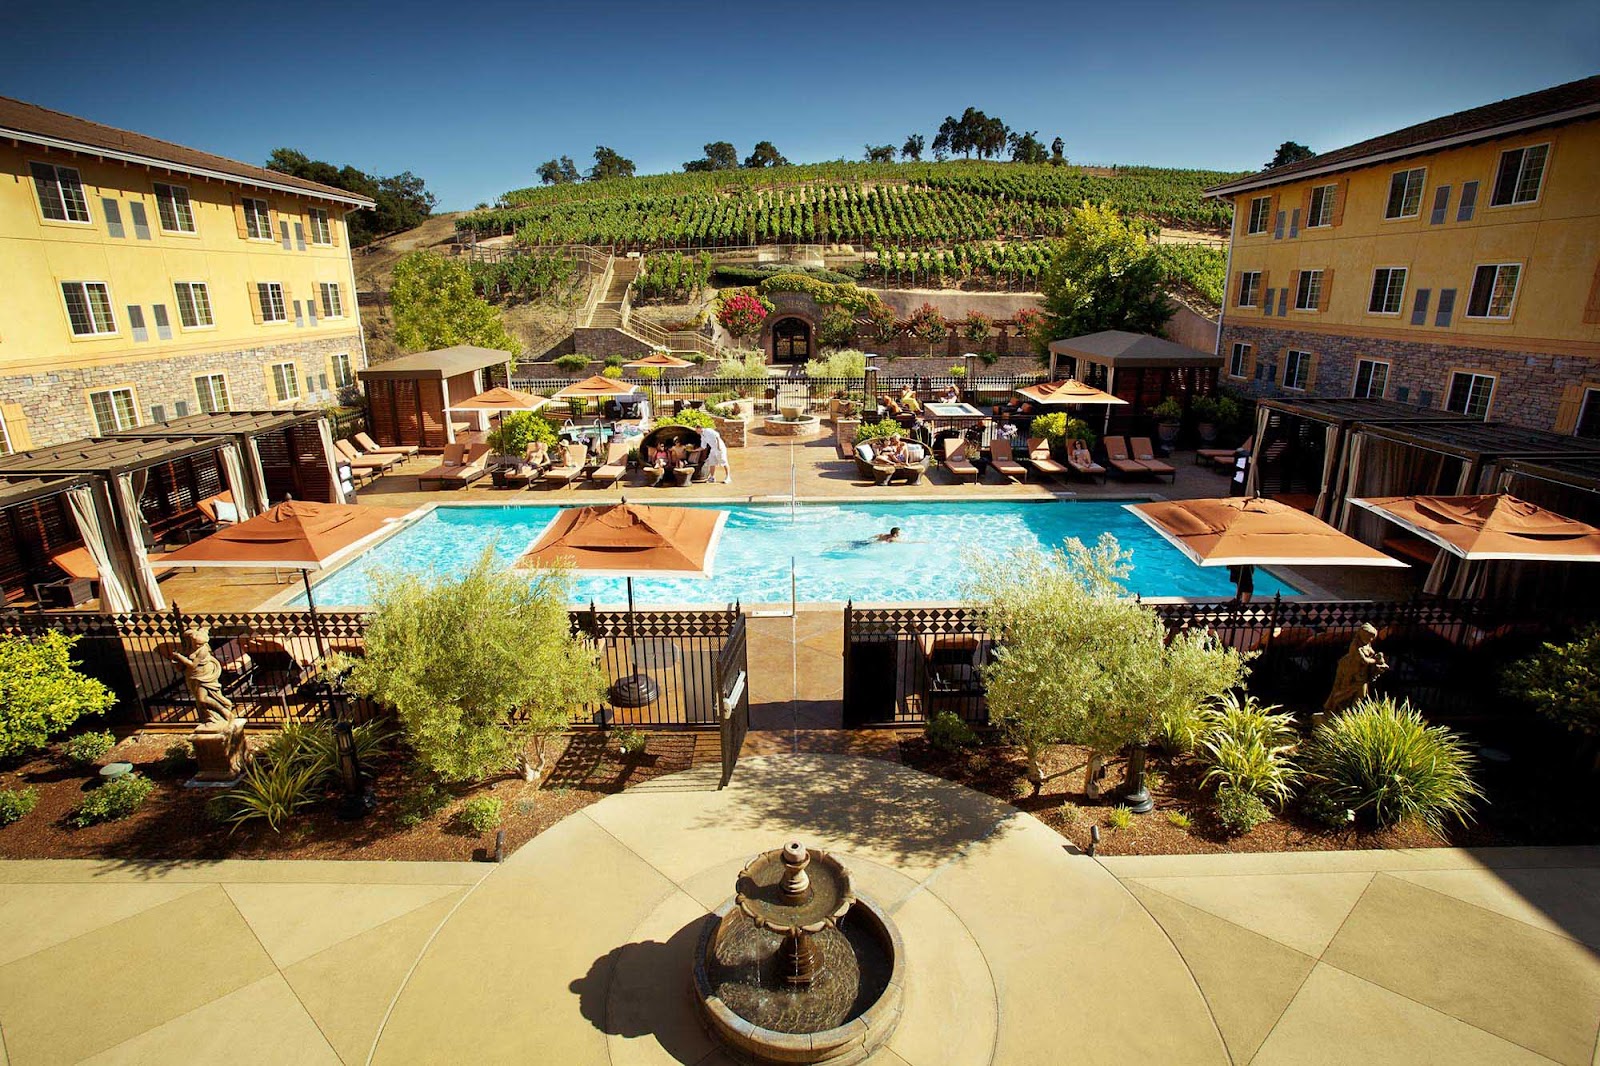 Landscape view of pool and vineyard at Meritage Resort & Spa, location of Food Photo Affair